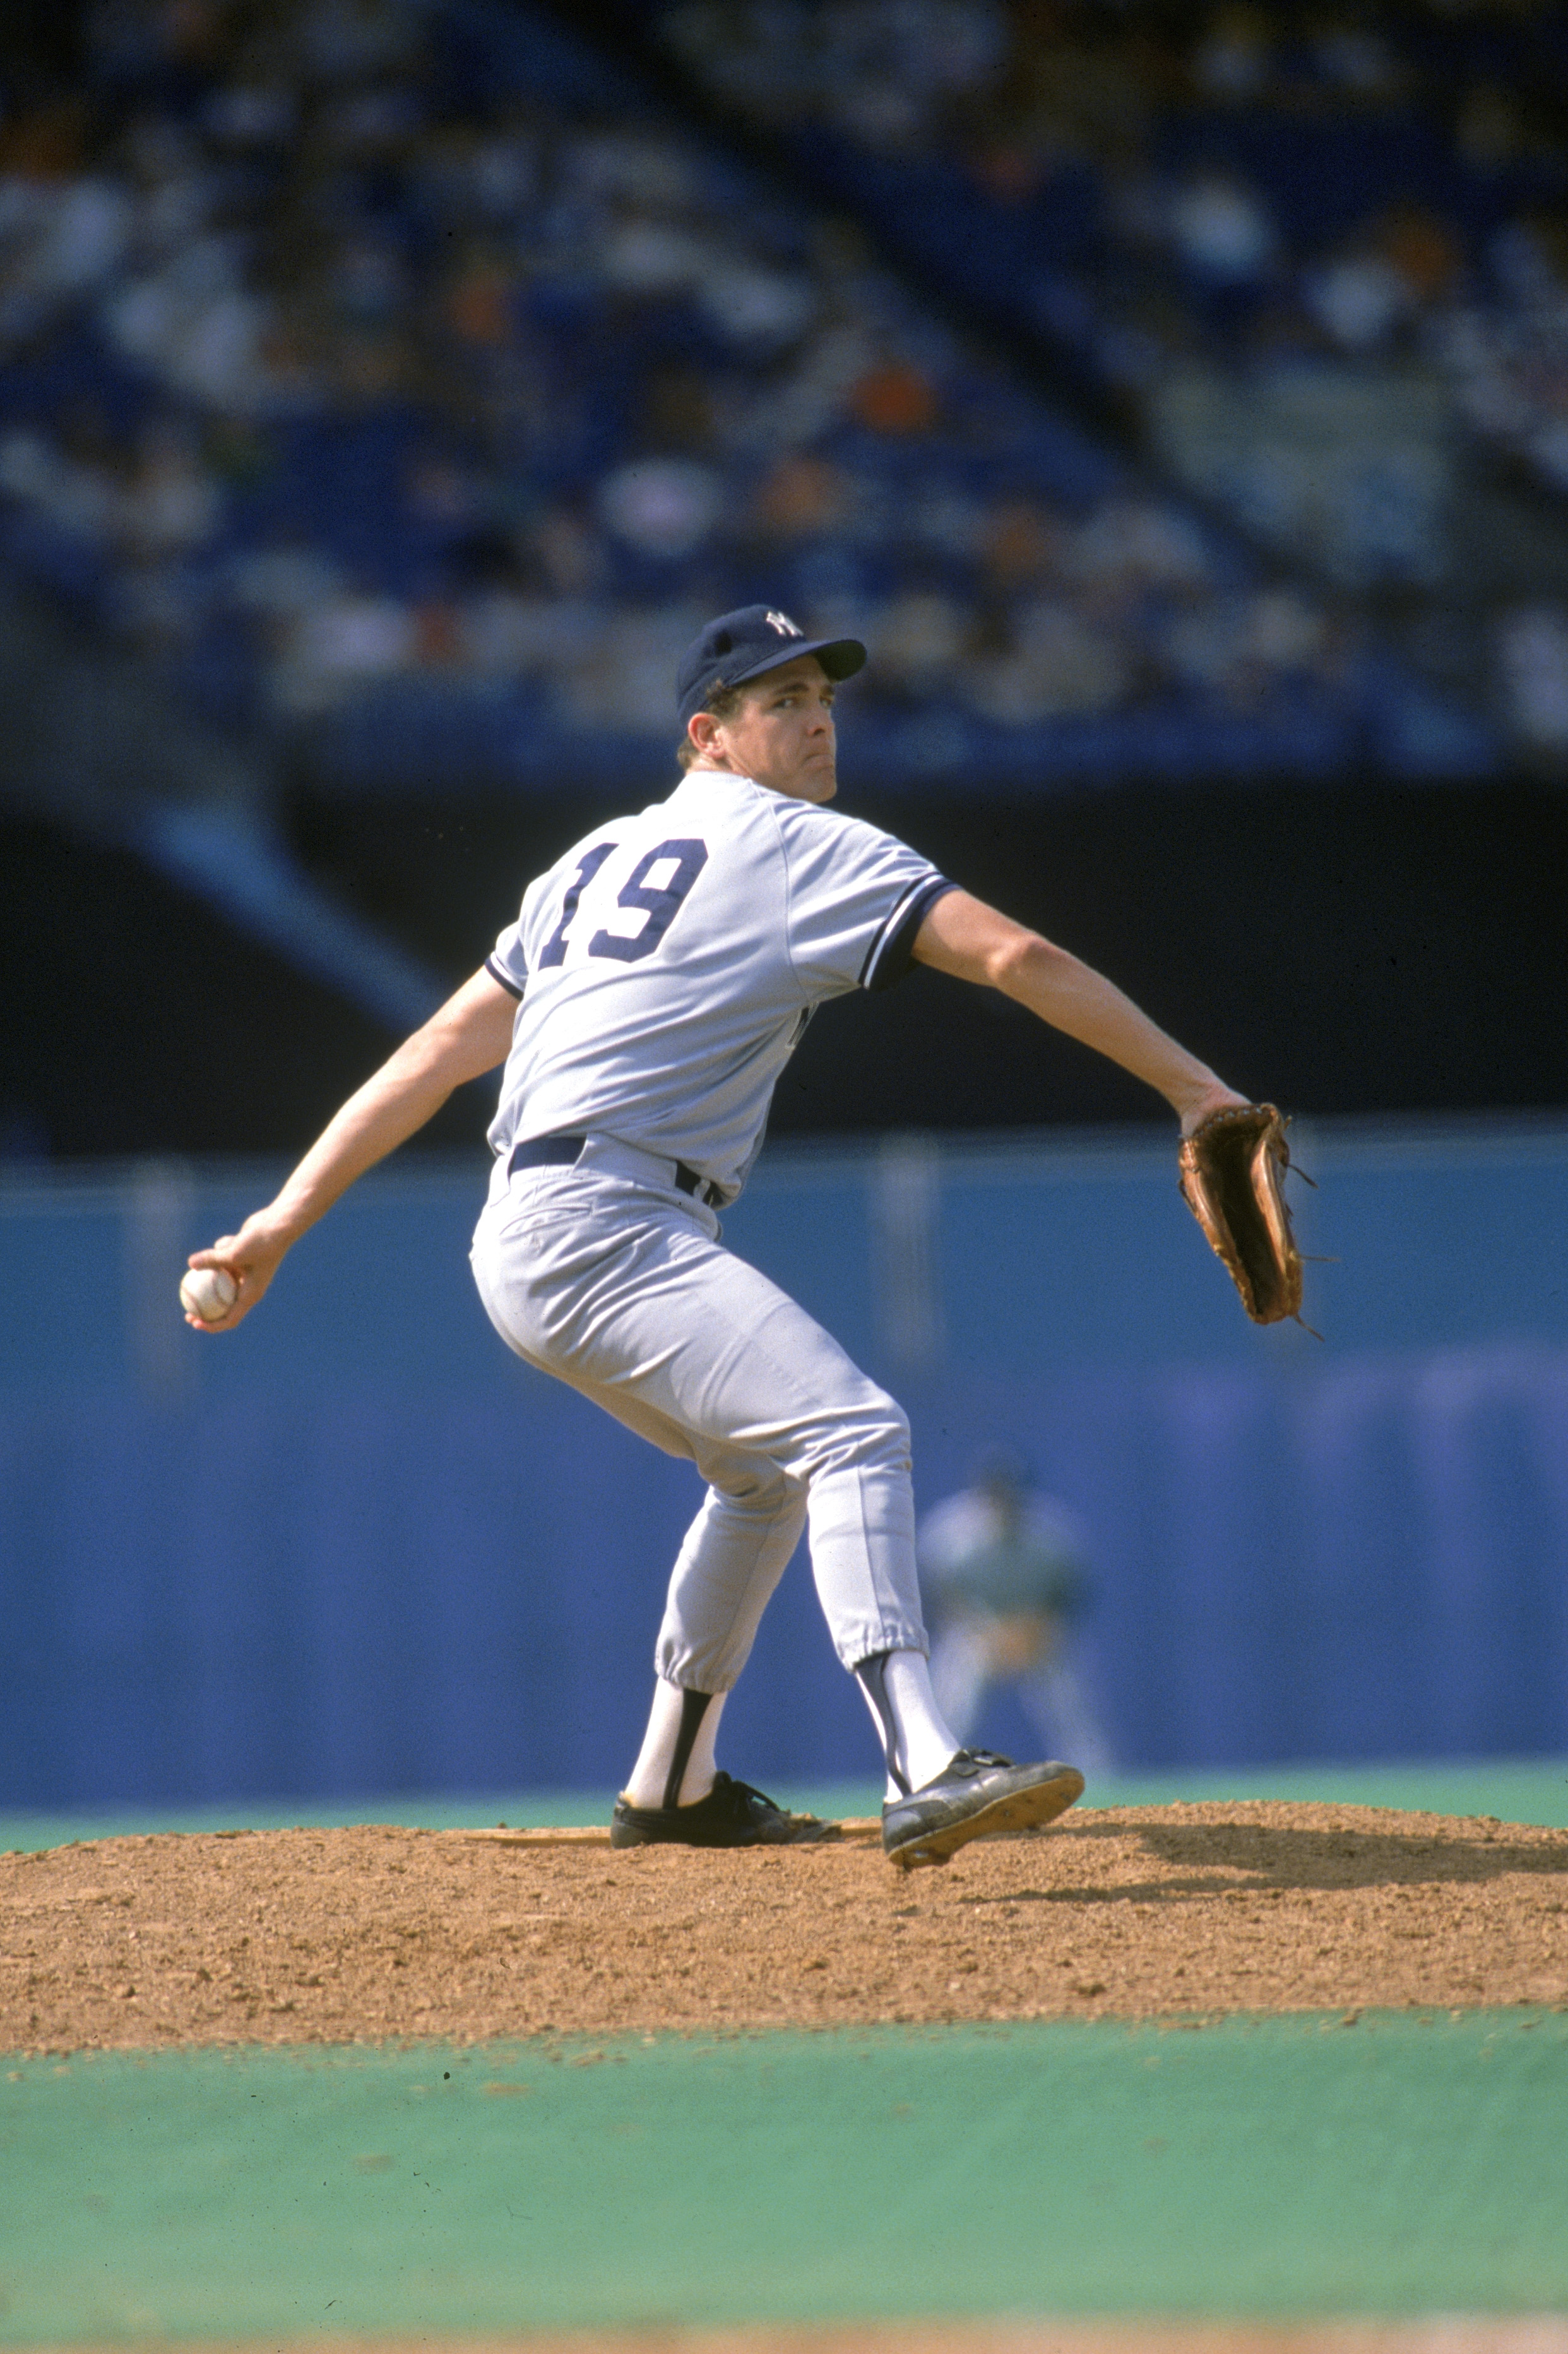 TORONTO - 1988:  Pitcher Dave Righetti #19 of the New York Yankees pitches during the game against the Toronto Blue Jays at Exhibition Stadium during the 1988 season in Toronto, Ontario, Canada.  (Photo by Rick Stewart/Getty Images)